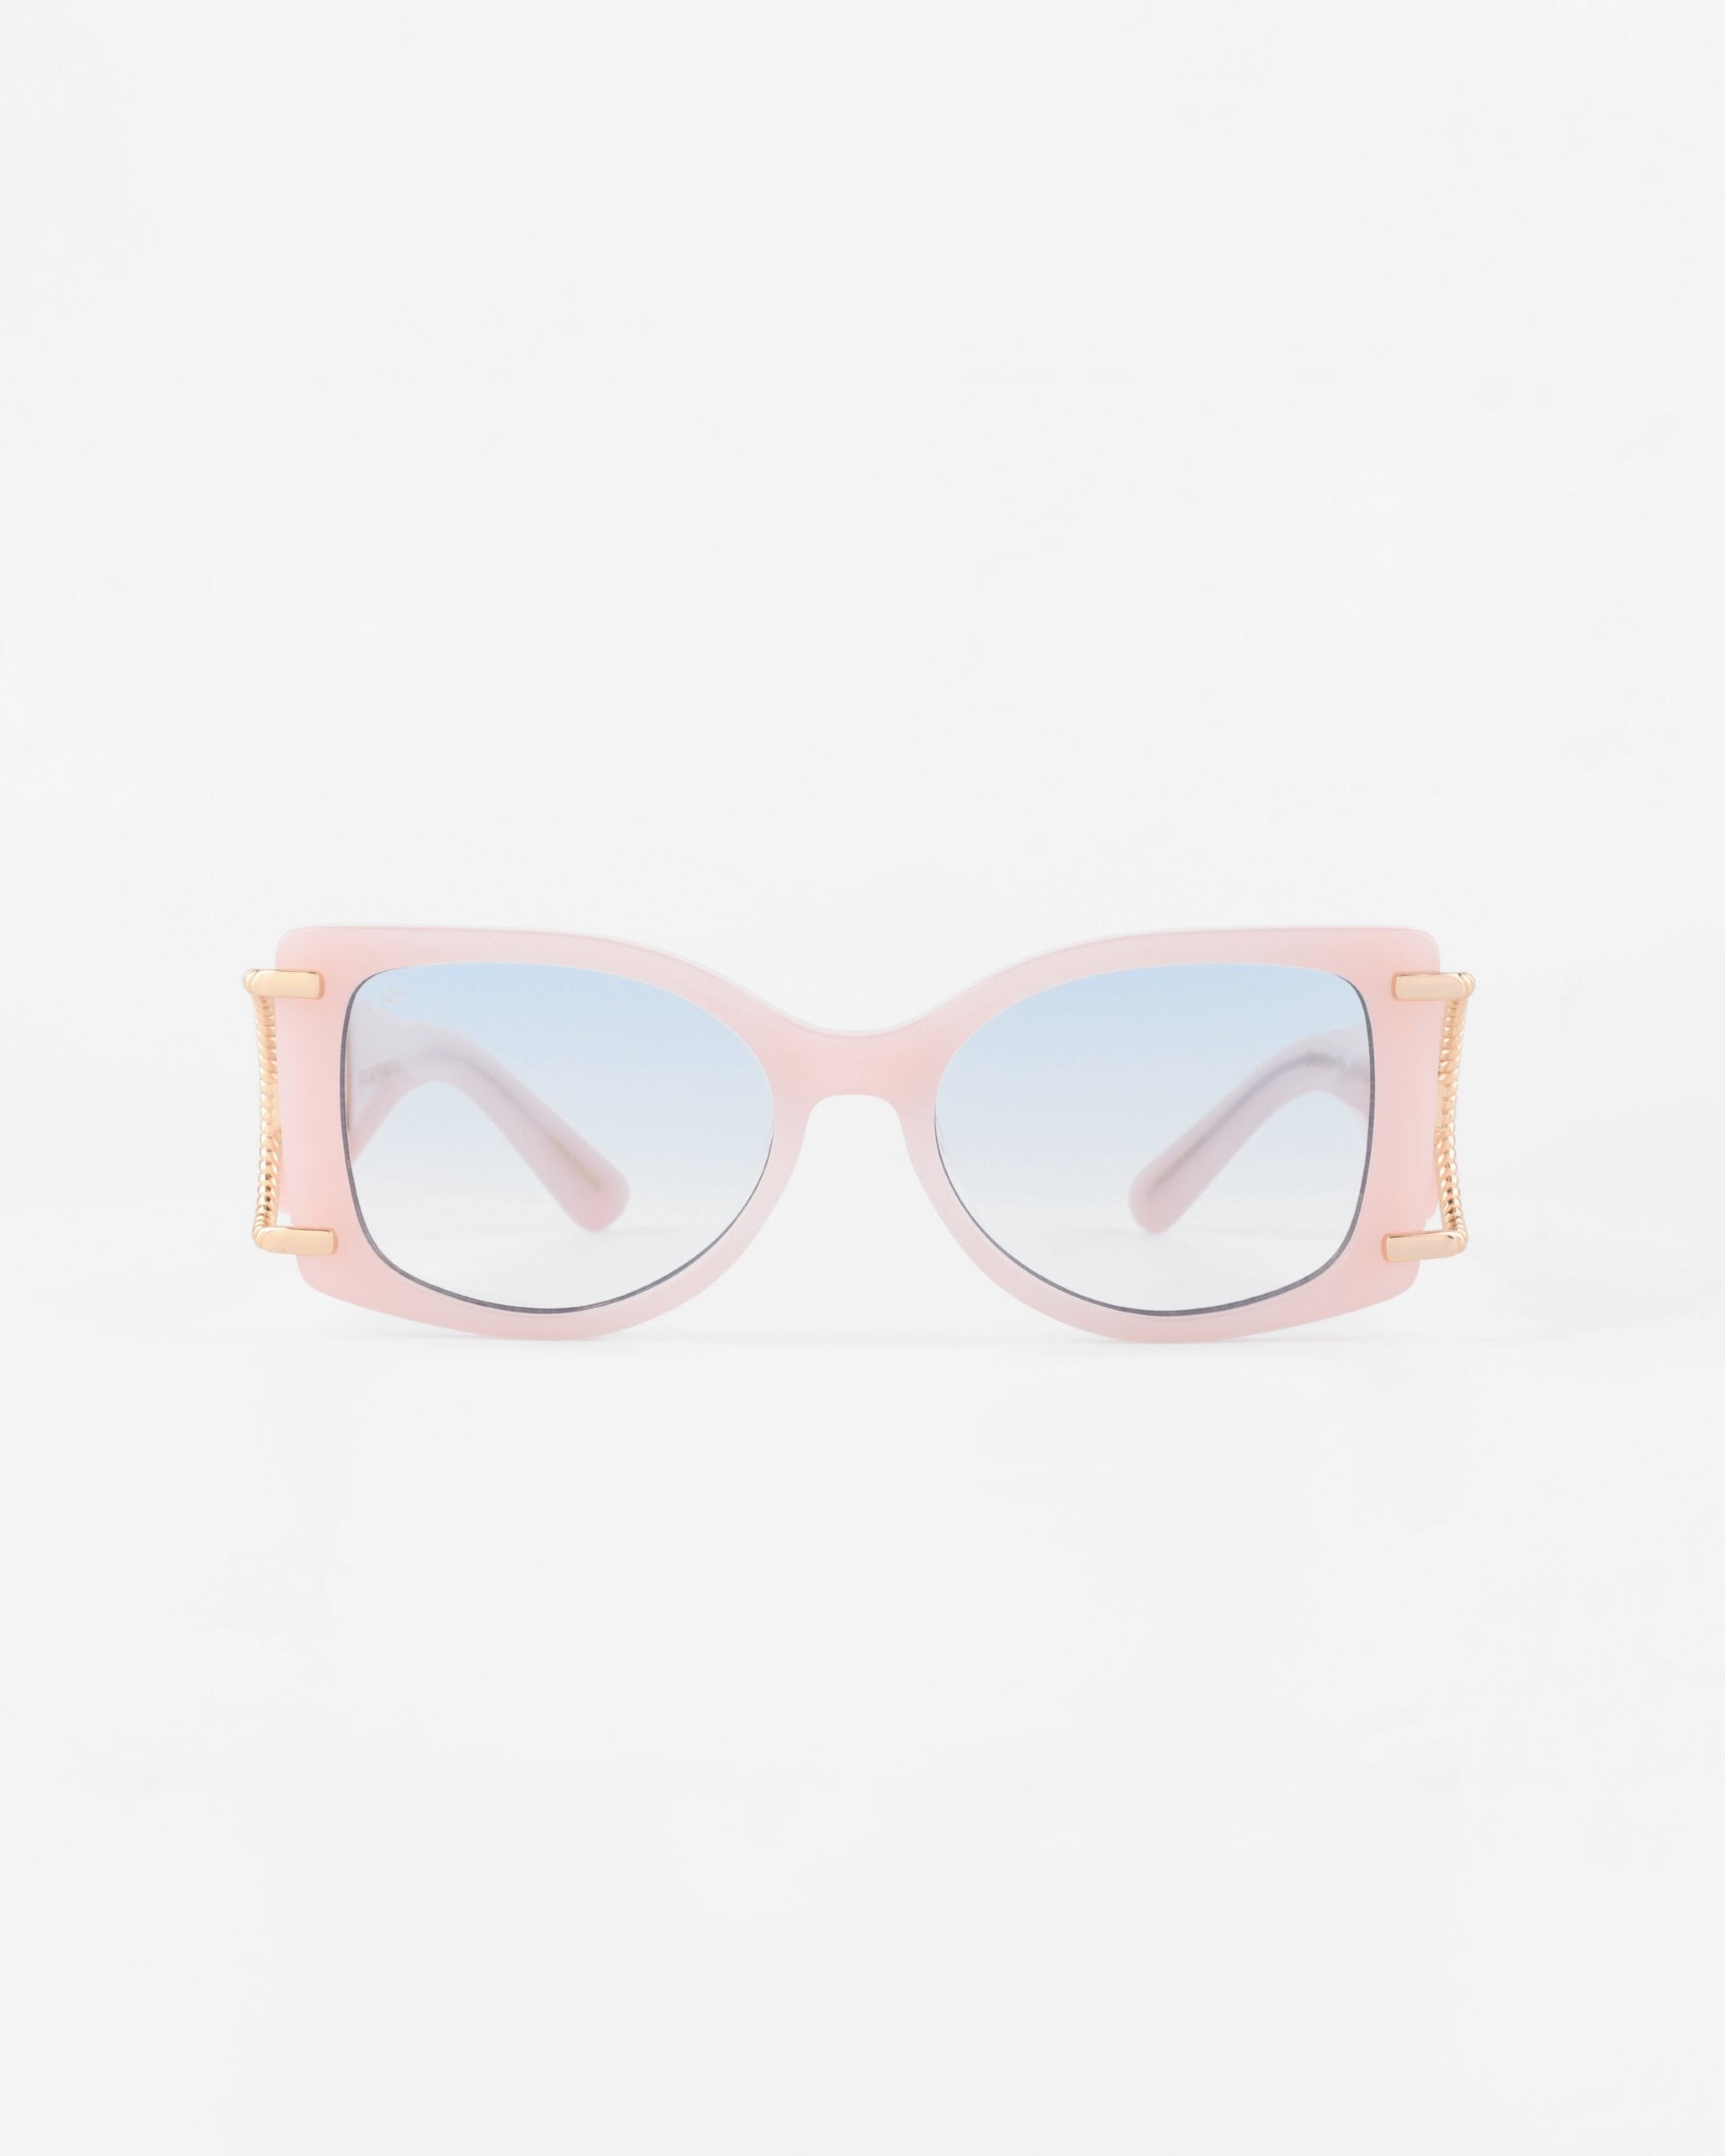 A pair of stylish pink oversized square acetate sunglasses with gradient lenses, named Sculpture by For Art's Sake®. The sunglasses feature 18-karat gold-plated accents on the temples and provide 100% UVA & UVB protection. The background is plain white.